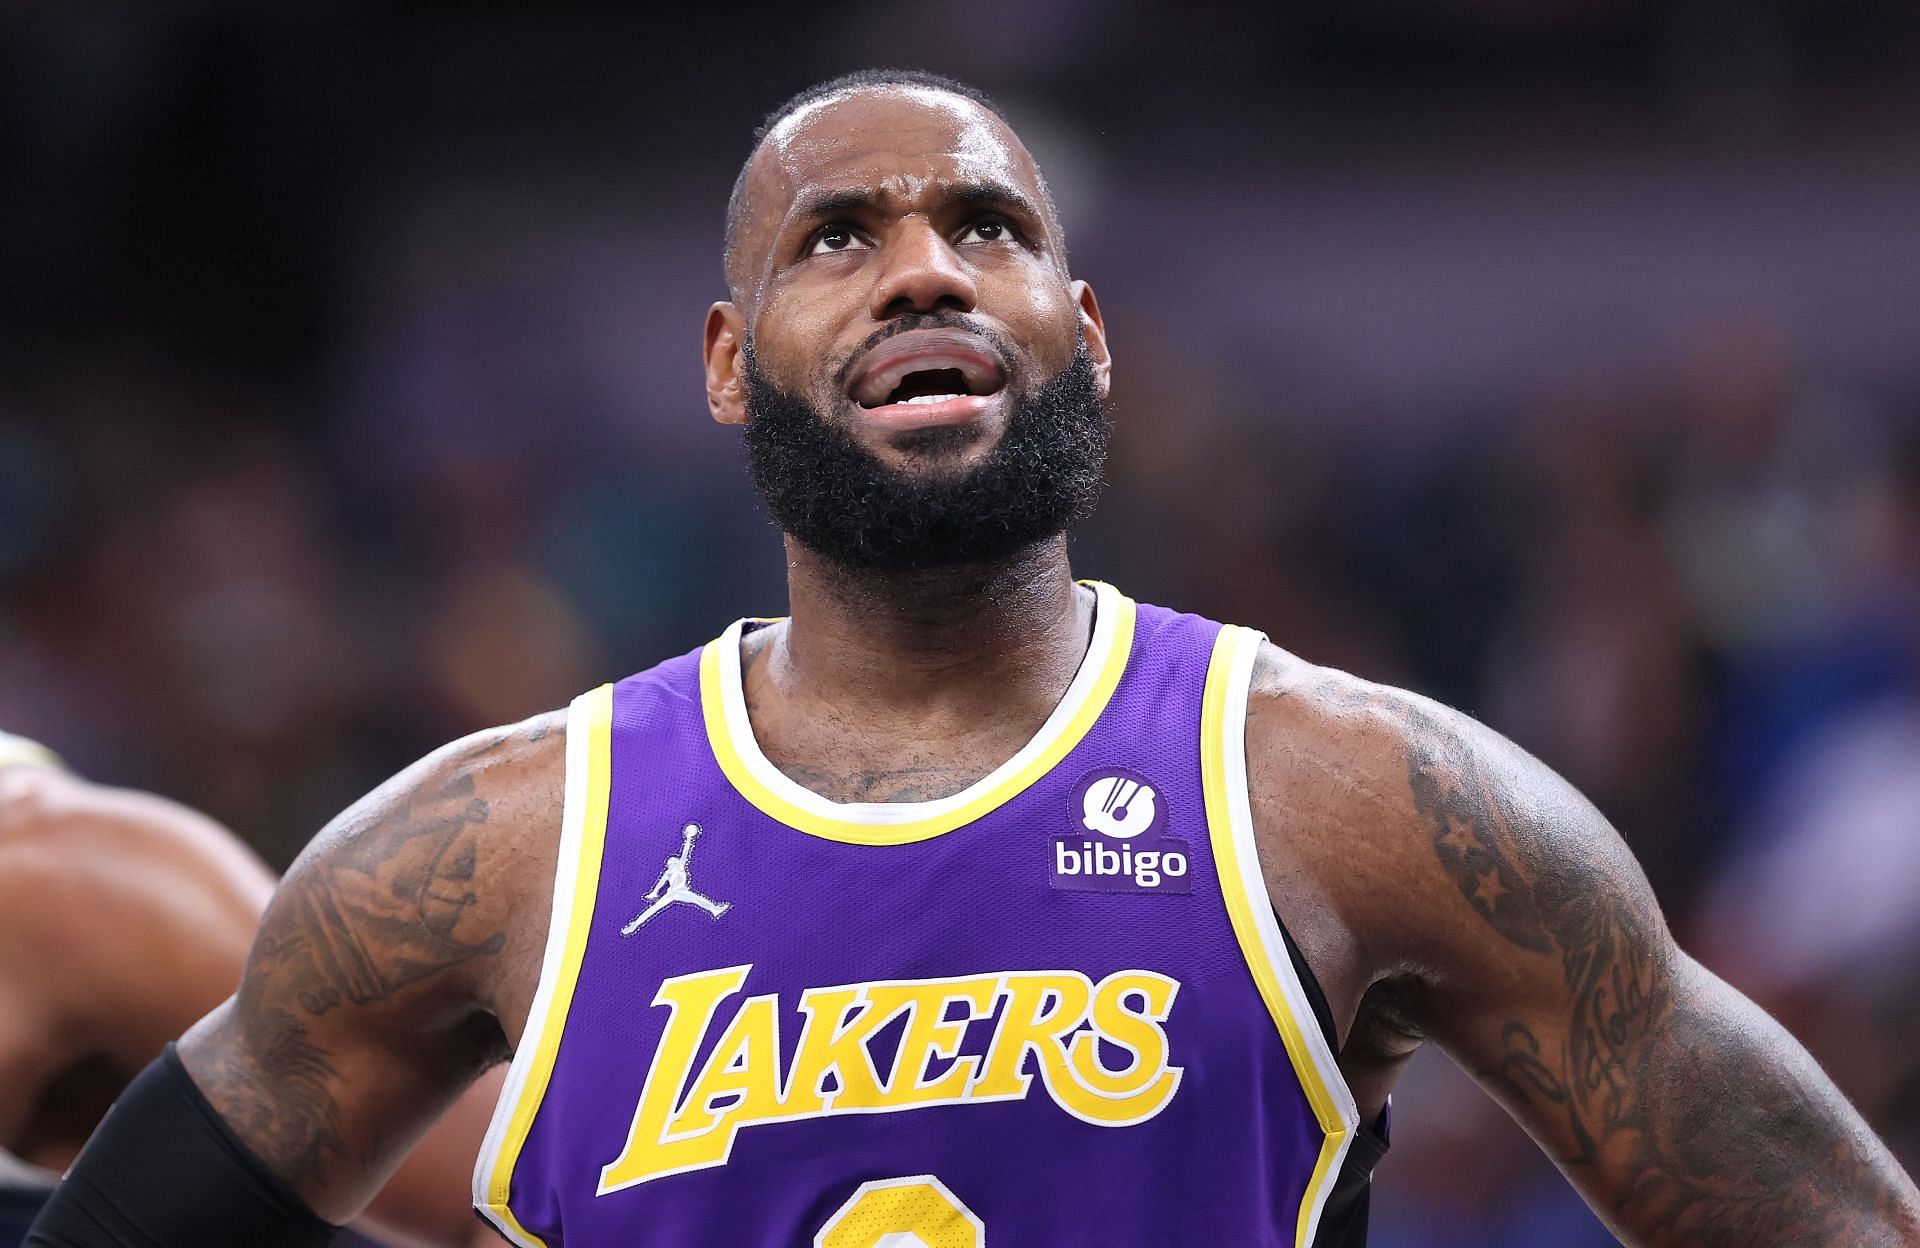 LeBron James is hoping to bring a championship to the Los Angeles Lakers this season